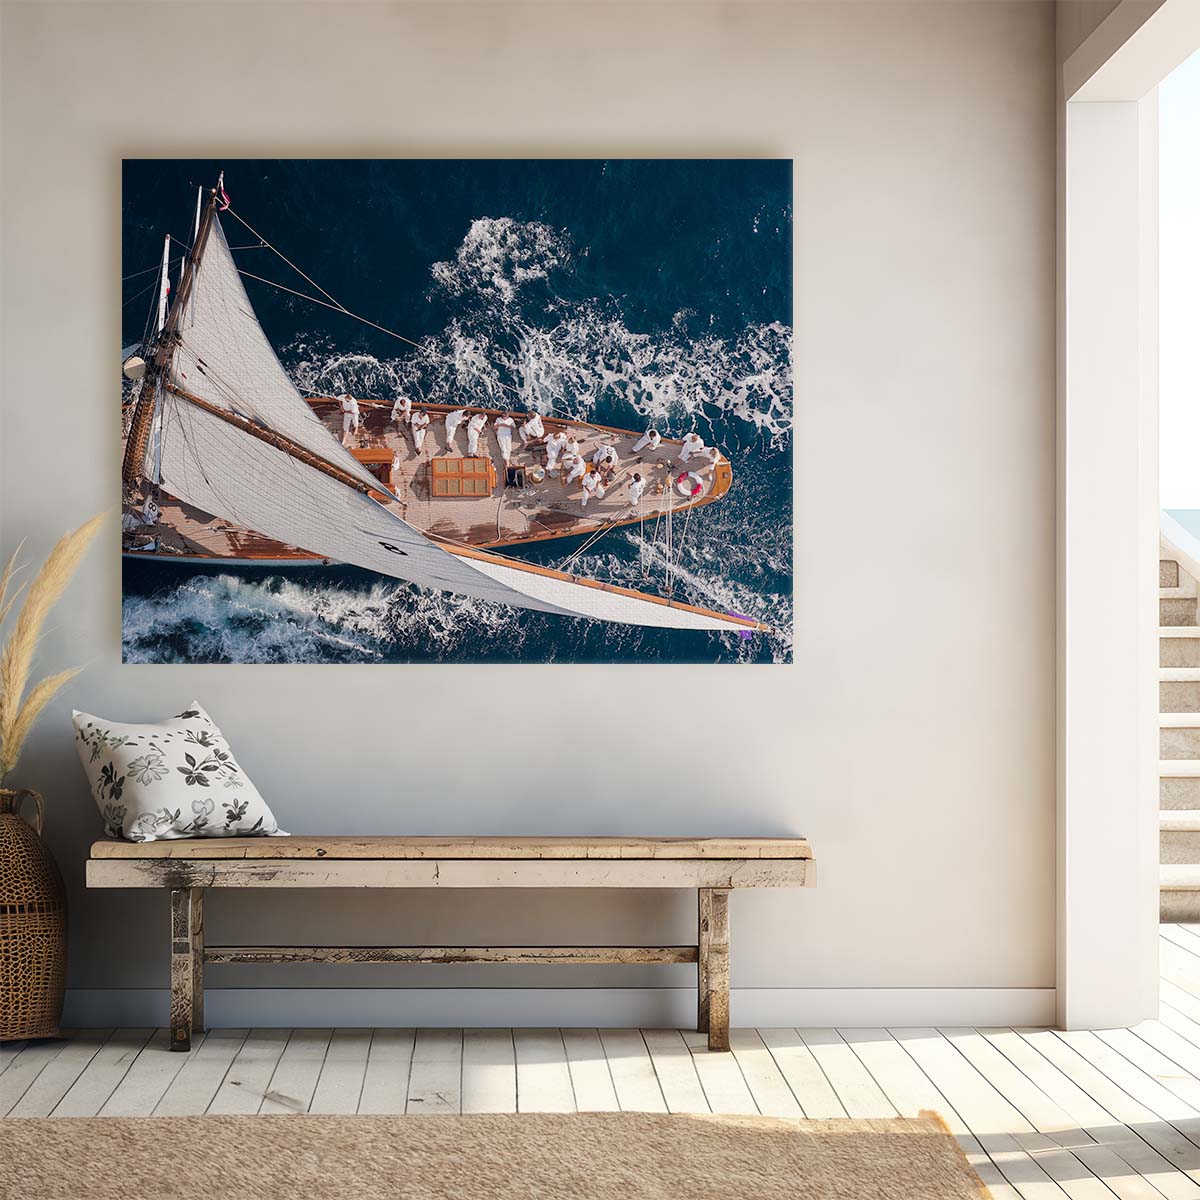 Regatta Elegance Cannes Yacht Race Seascape Wall Art by Luxuriance Designs. Made in USA.